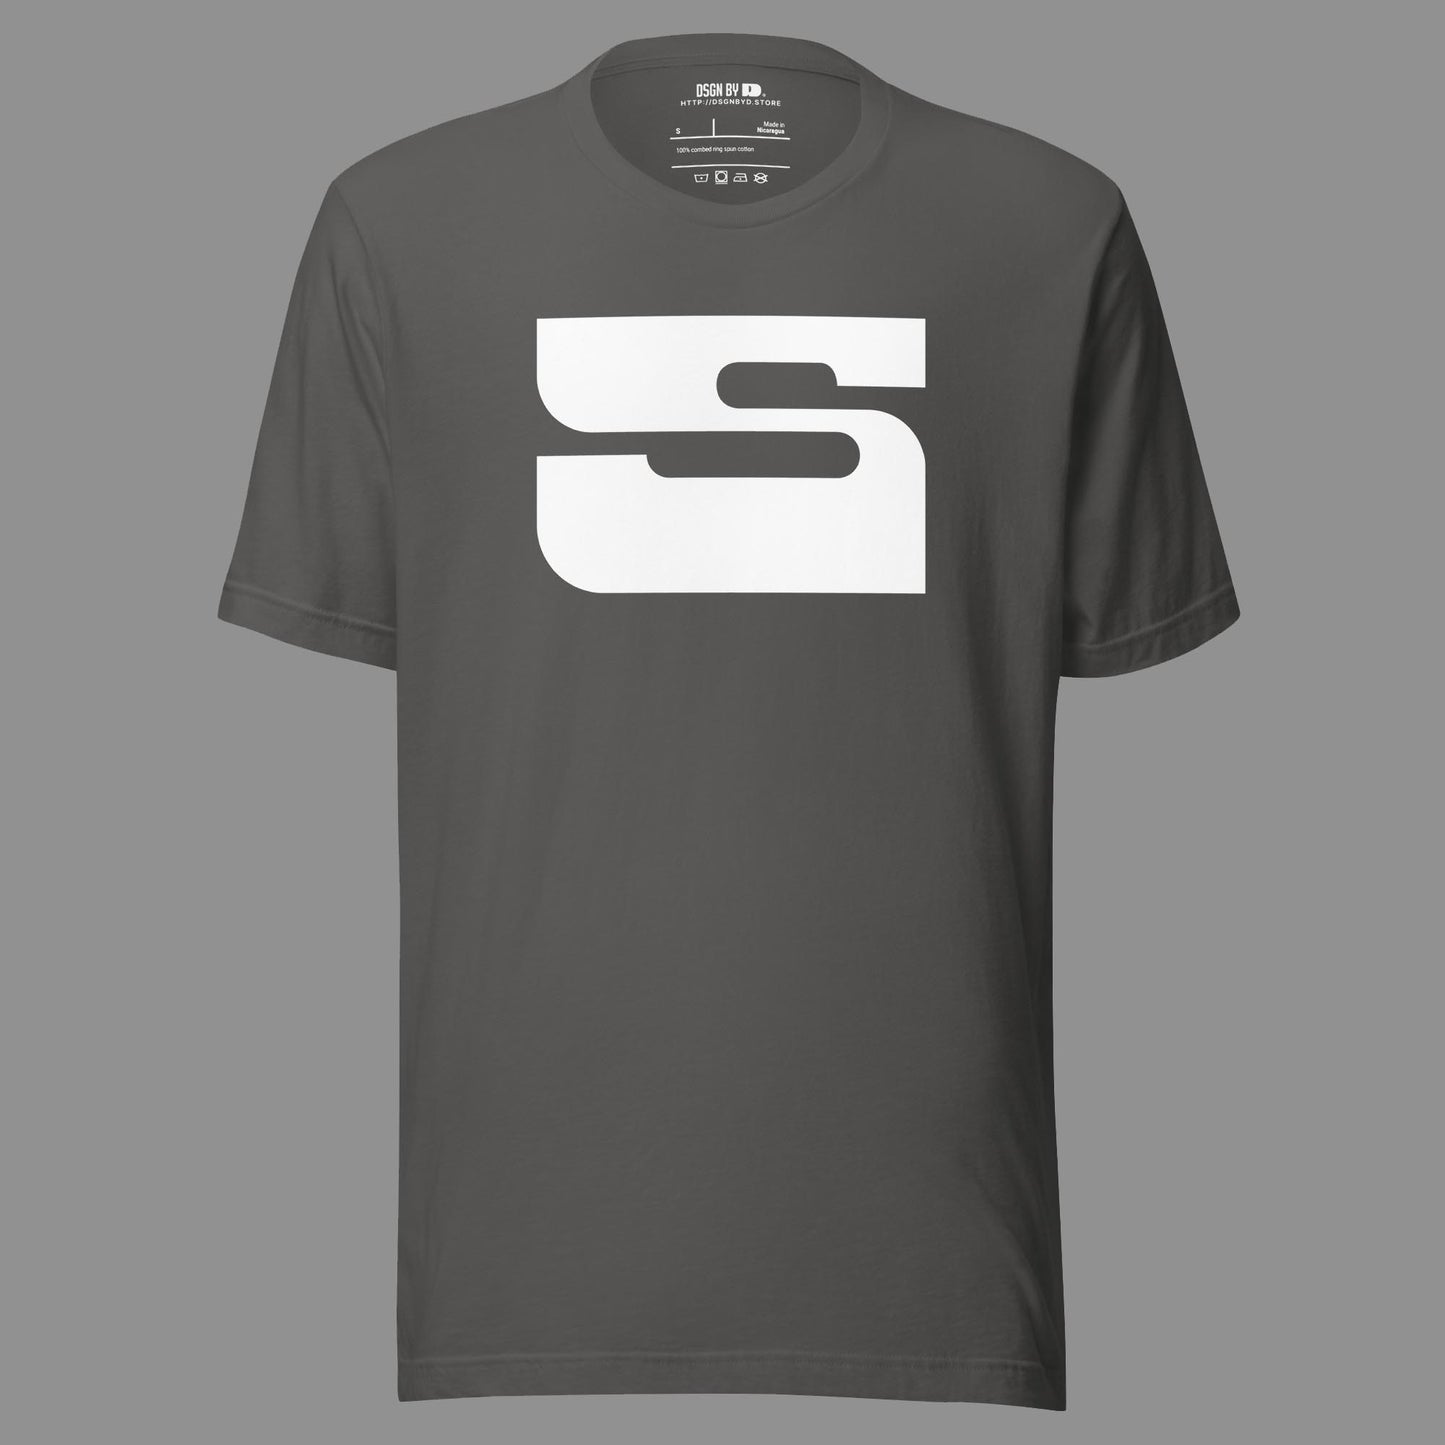 A grey cotton unisex graphic tee with letter S.